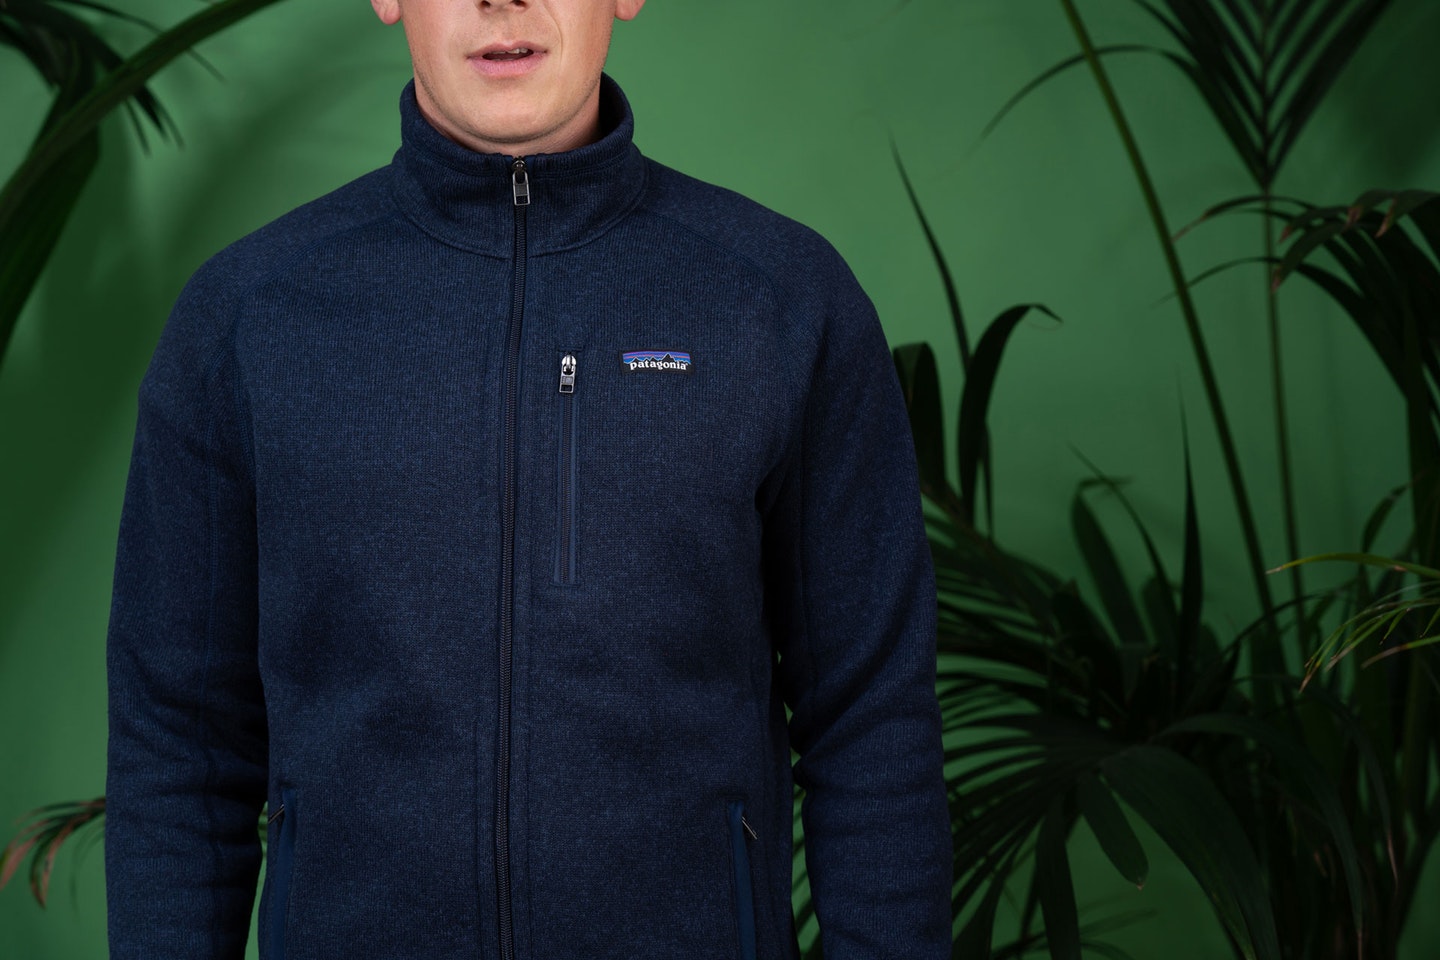 Eco-Friendly Outdoor Gear | 10 Sustainable Hiking Products: Patagonia Recycled Better Sweater